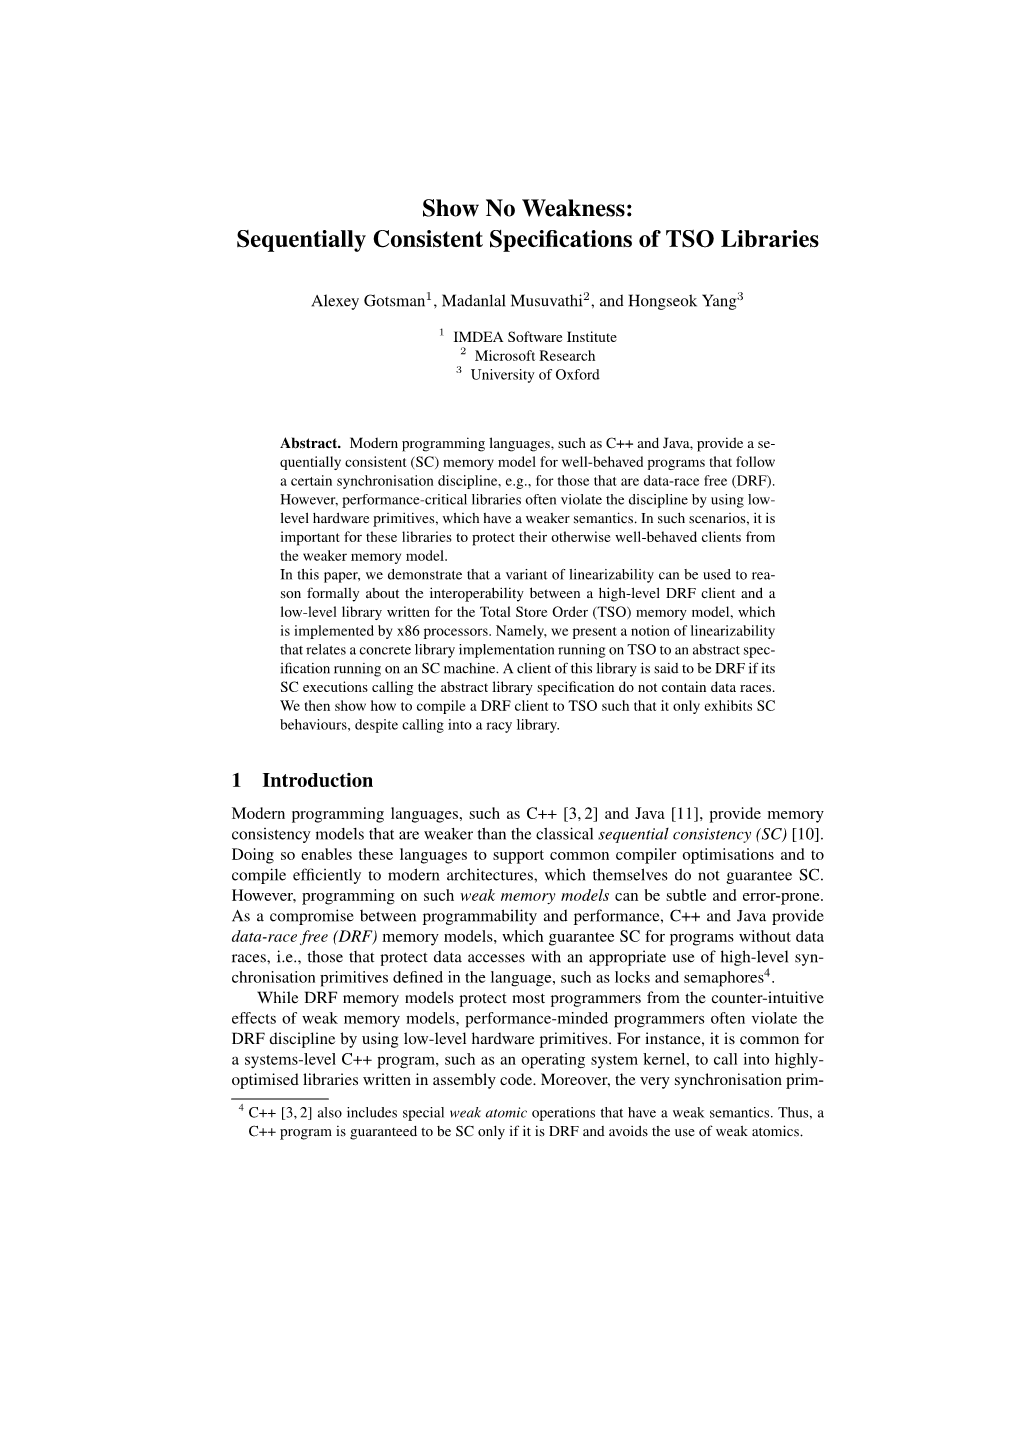 Show No Weakness: Sequentially Consistent Specifications of TSO